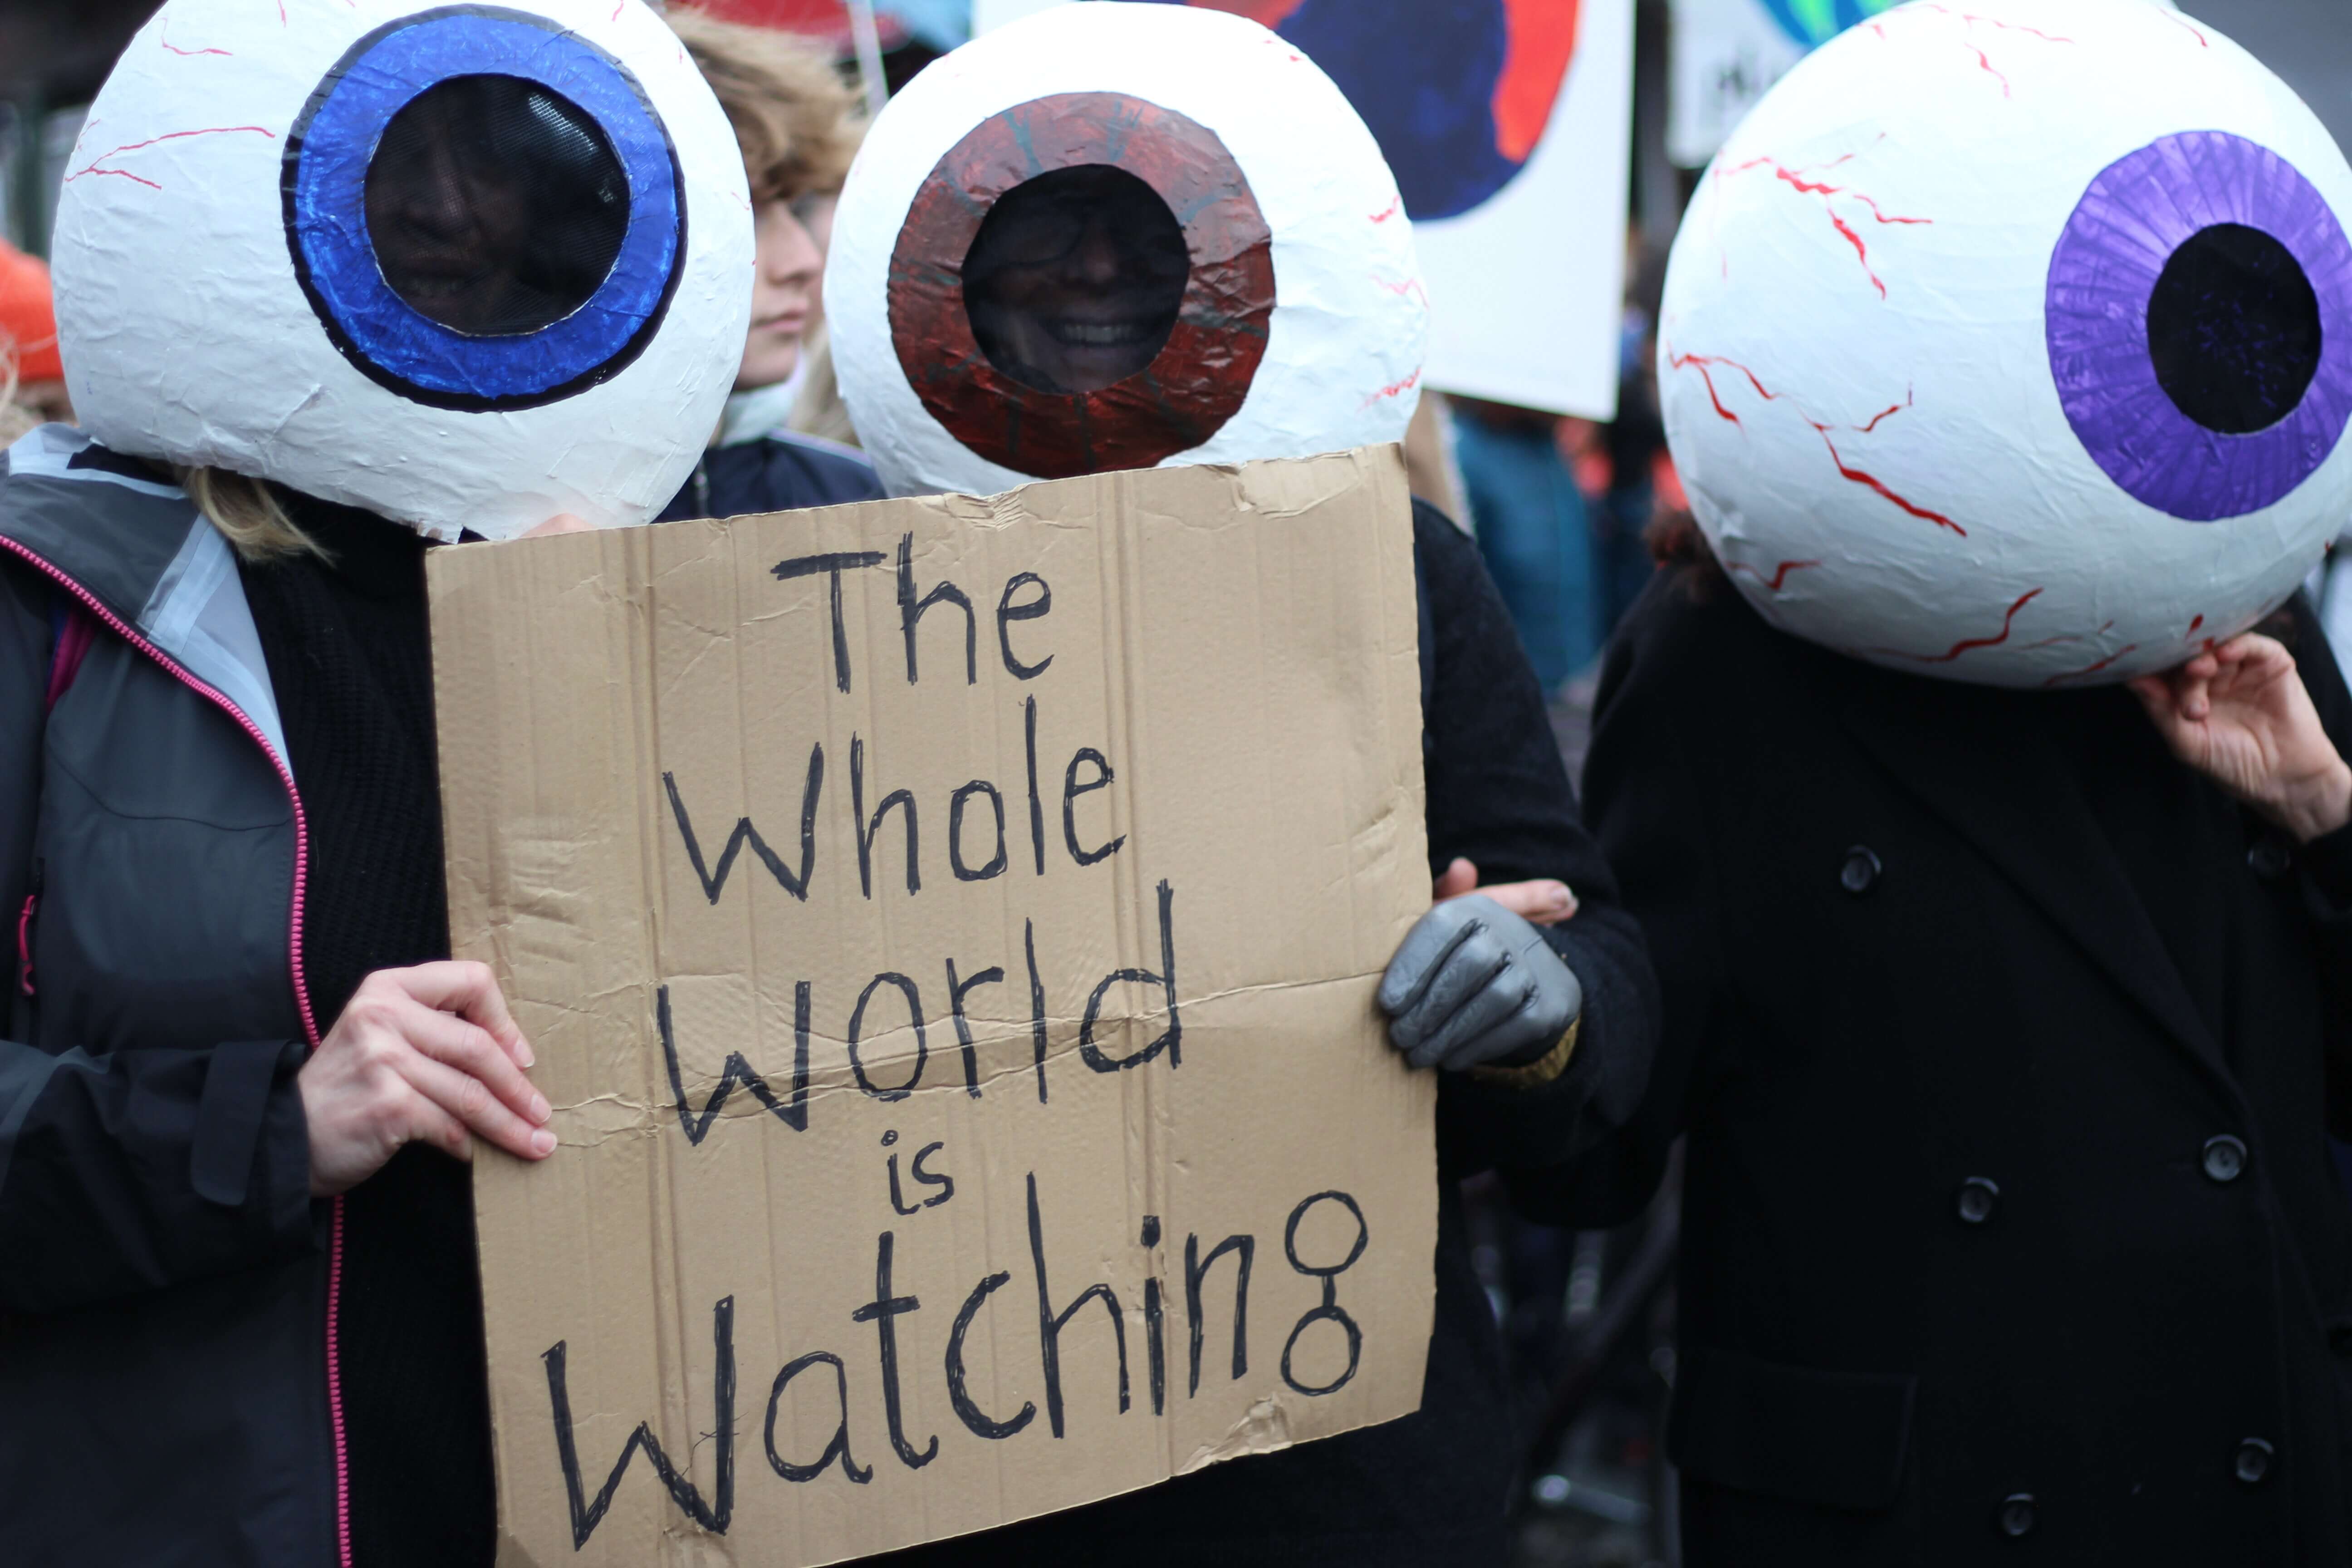 Image shows activists with papier mache eyes on their heads holding up a sign saying "The Whole World is Watching"